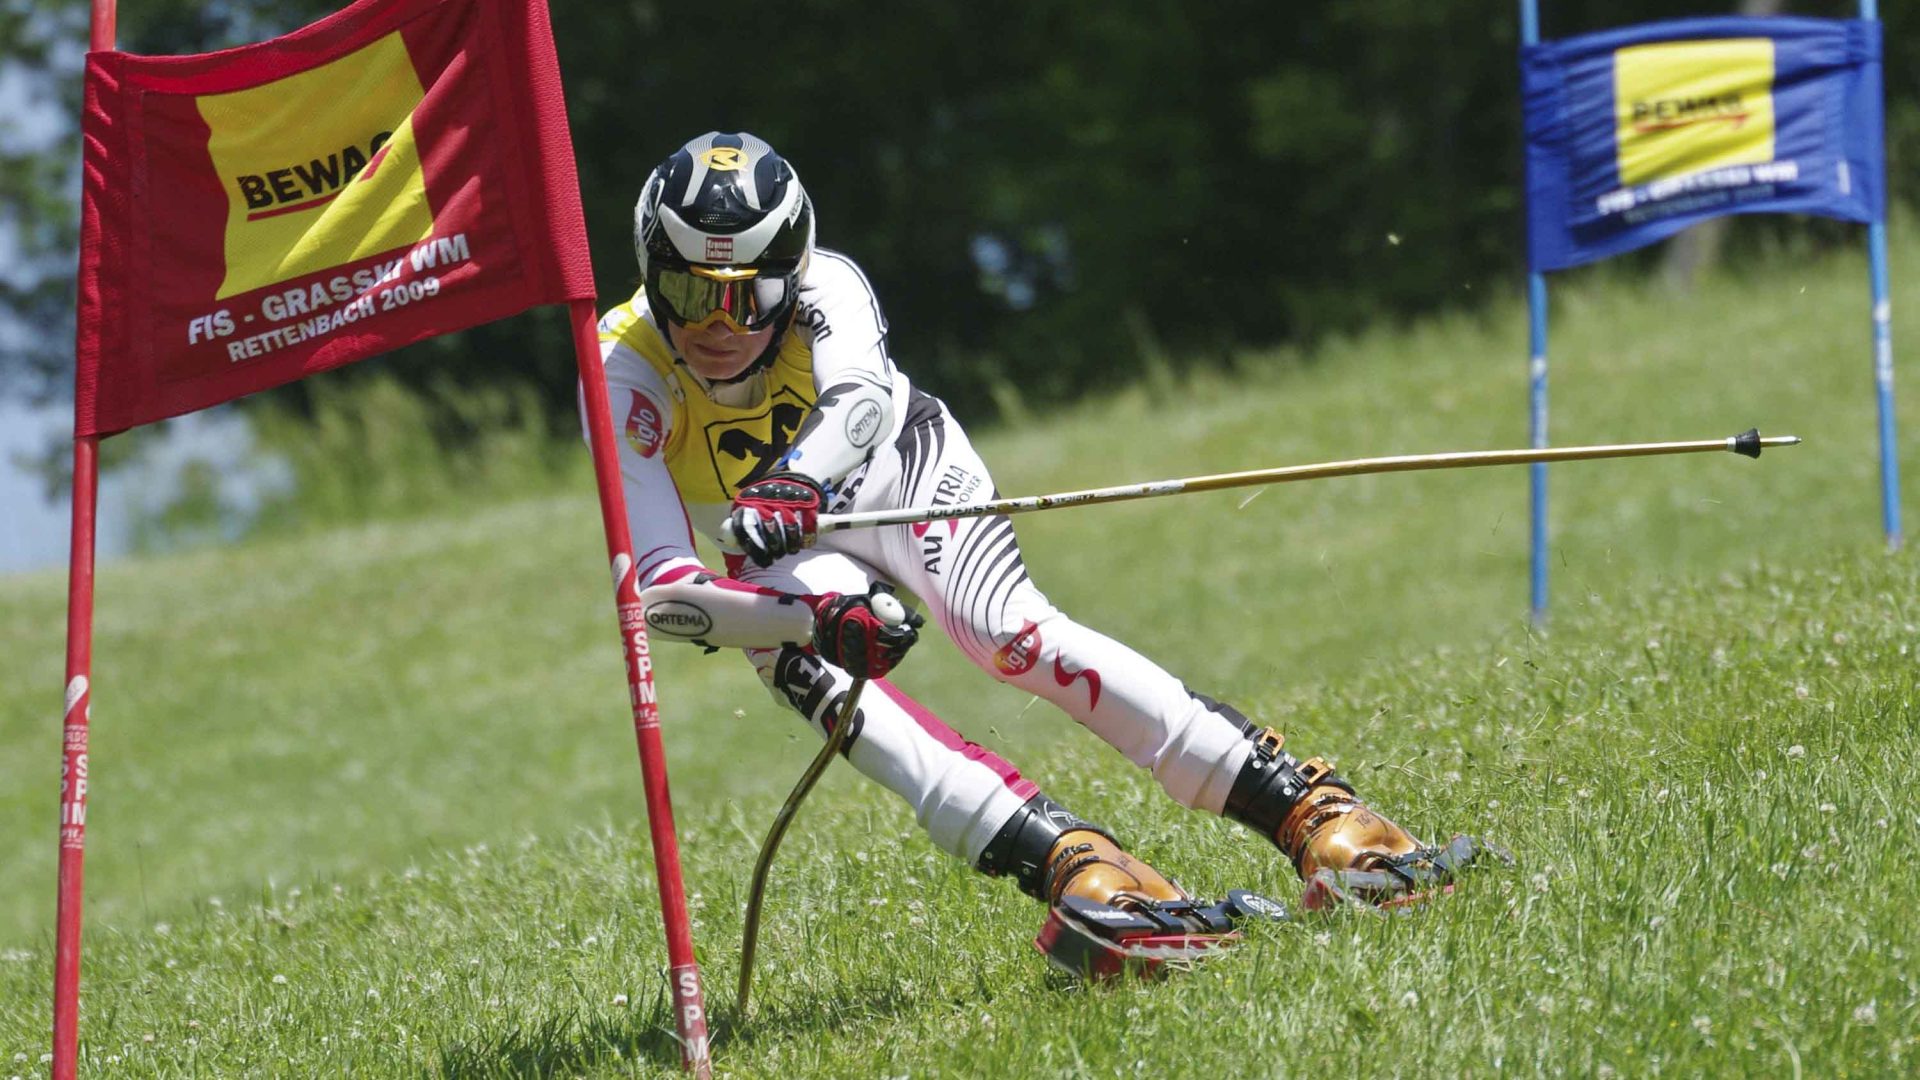 Is grass skiing the answer to a sport threatened by climate change?